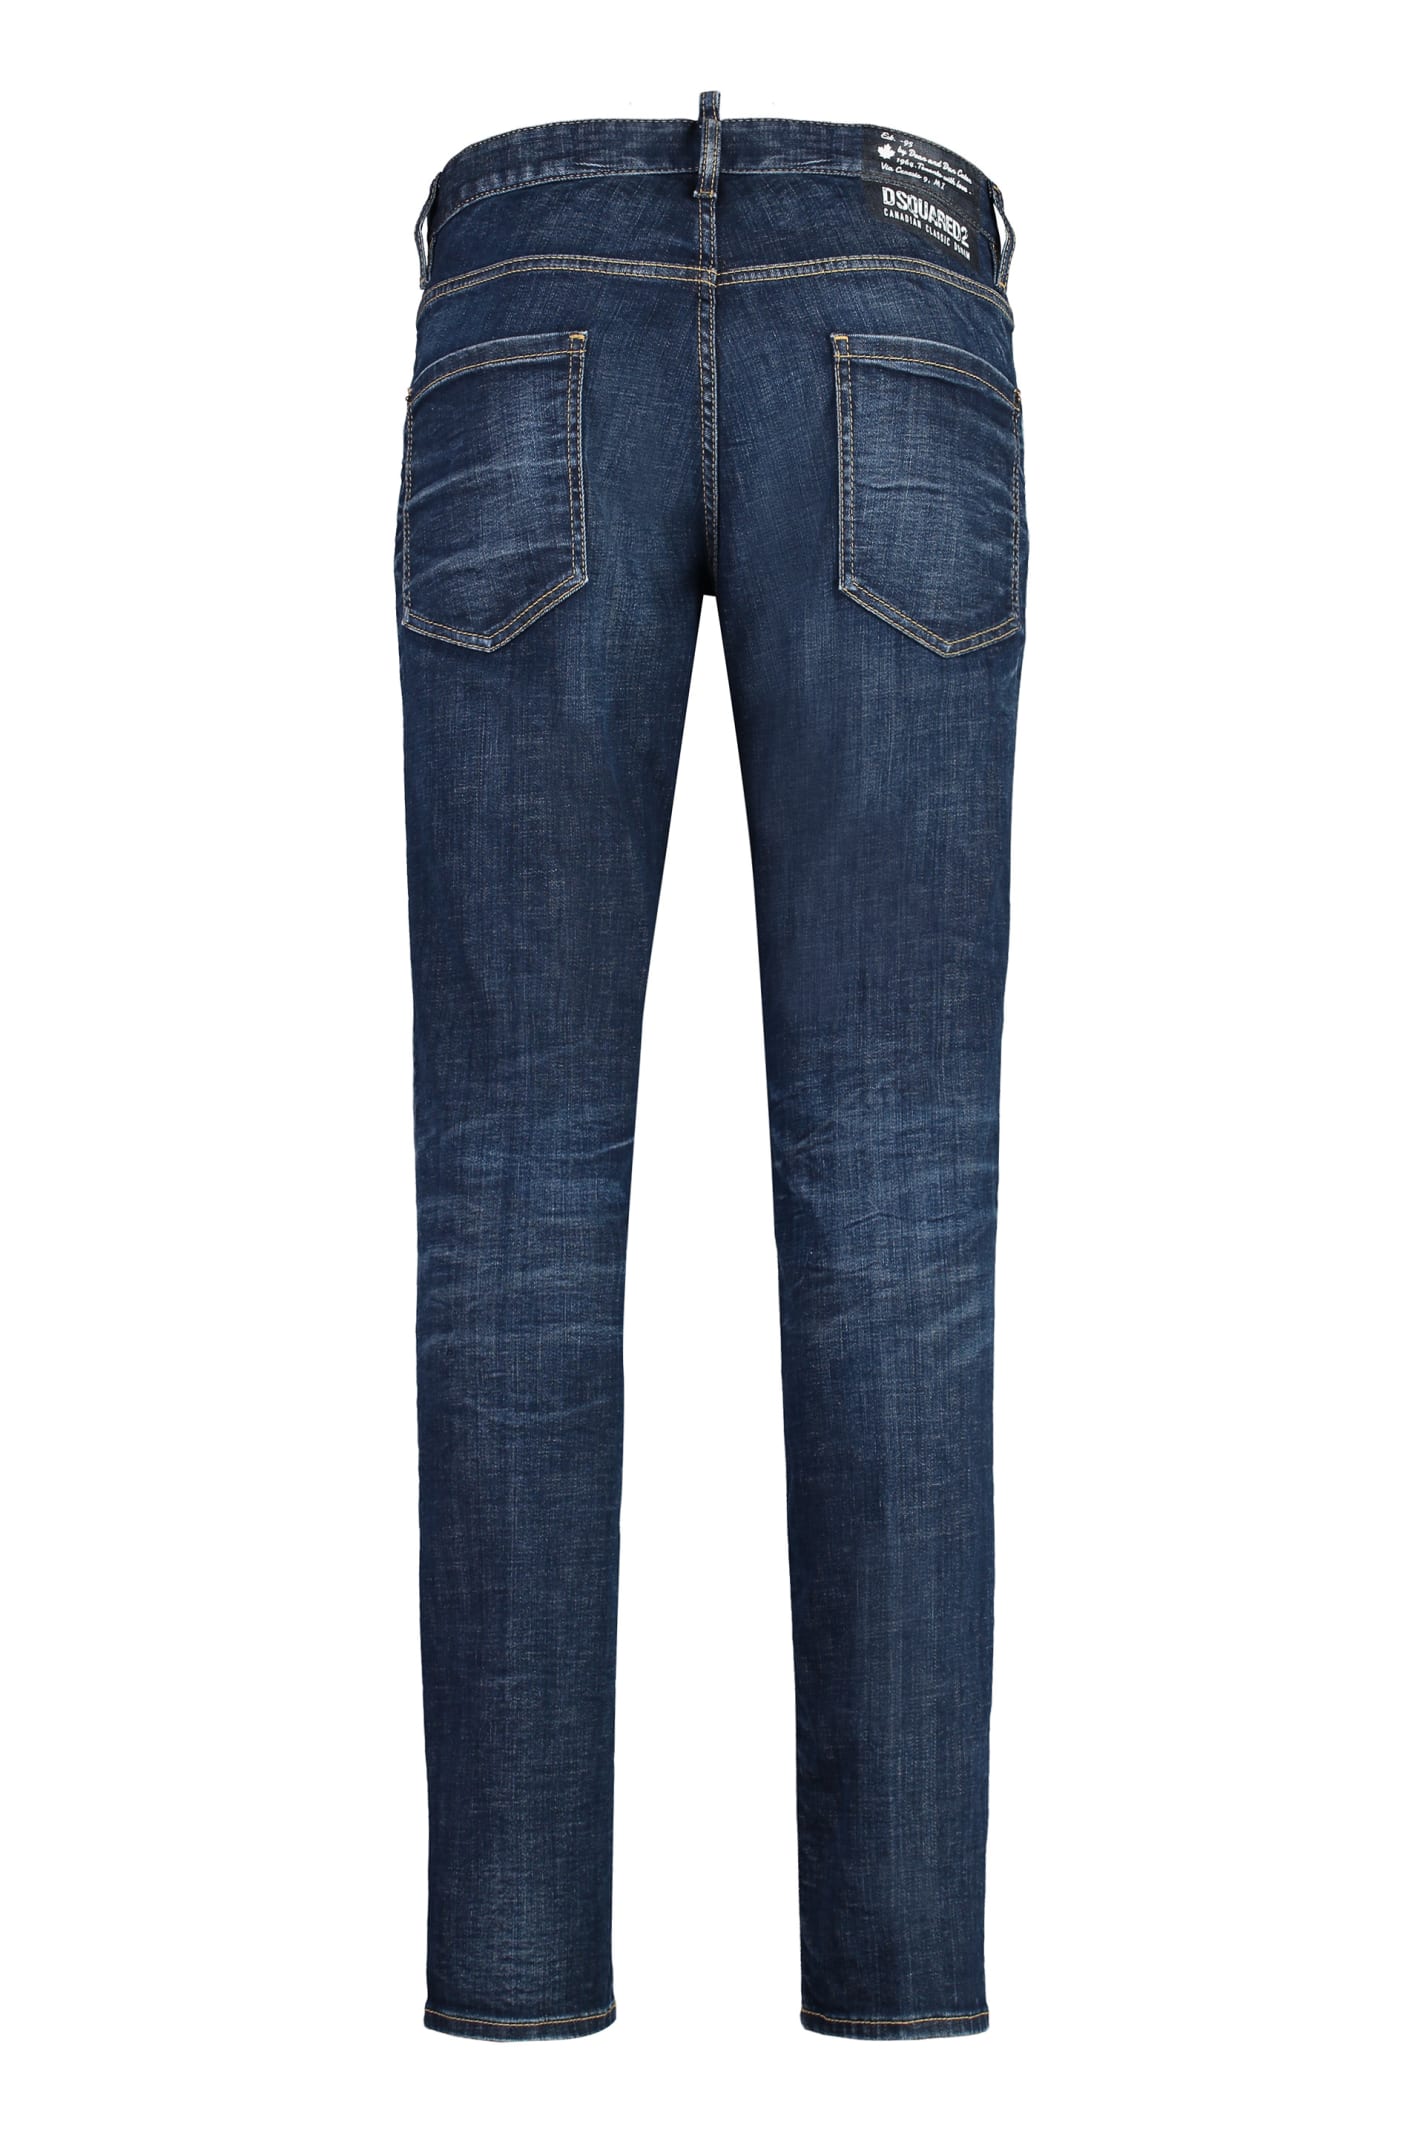 Shop Dsquared2 Cool-guy Jeans